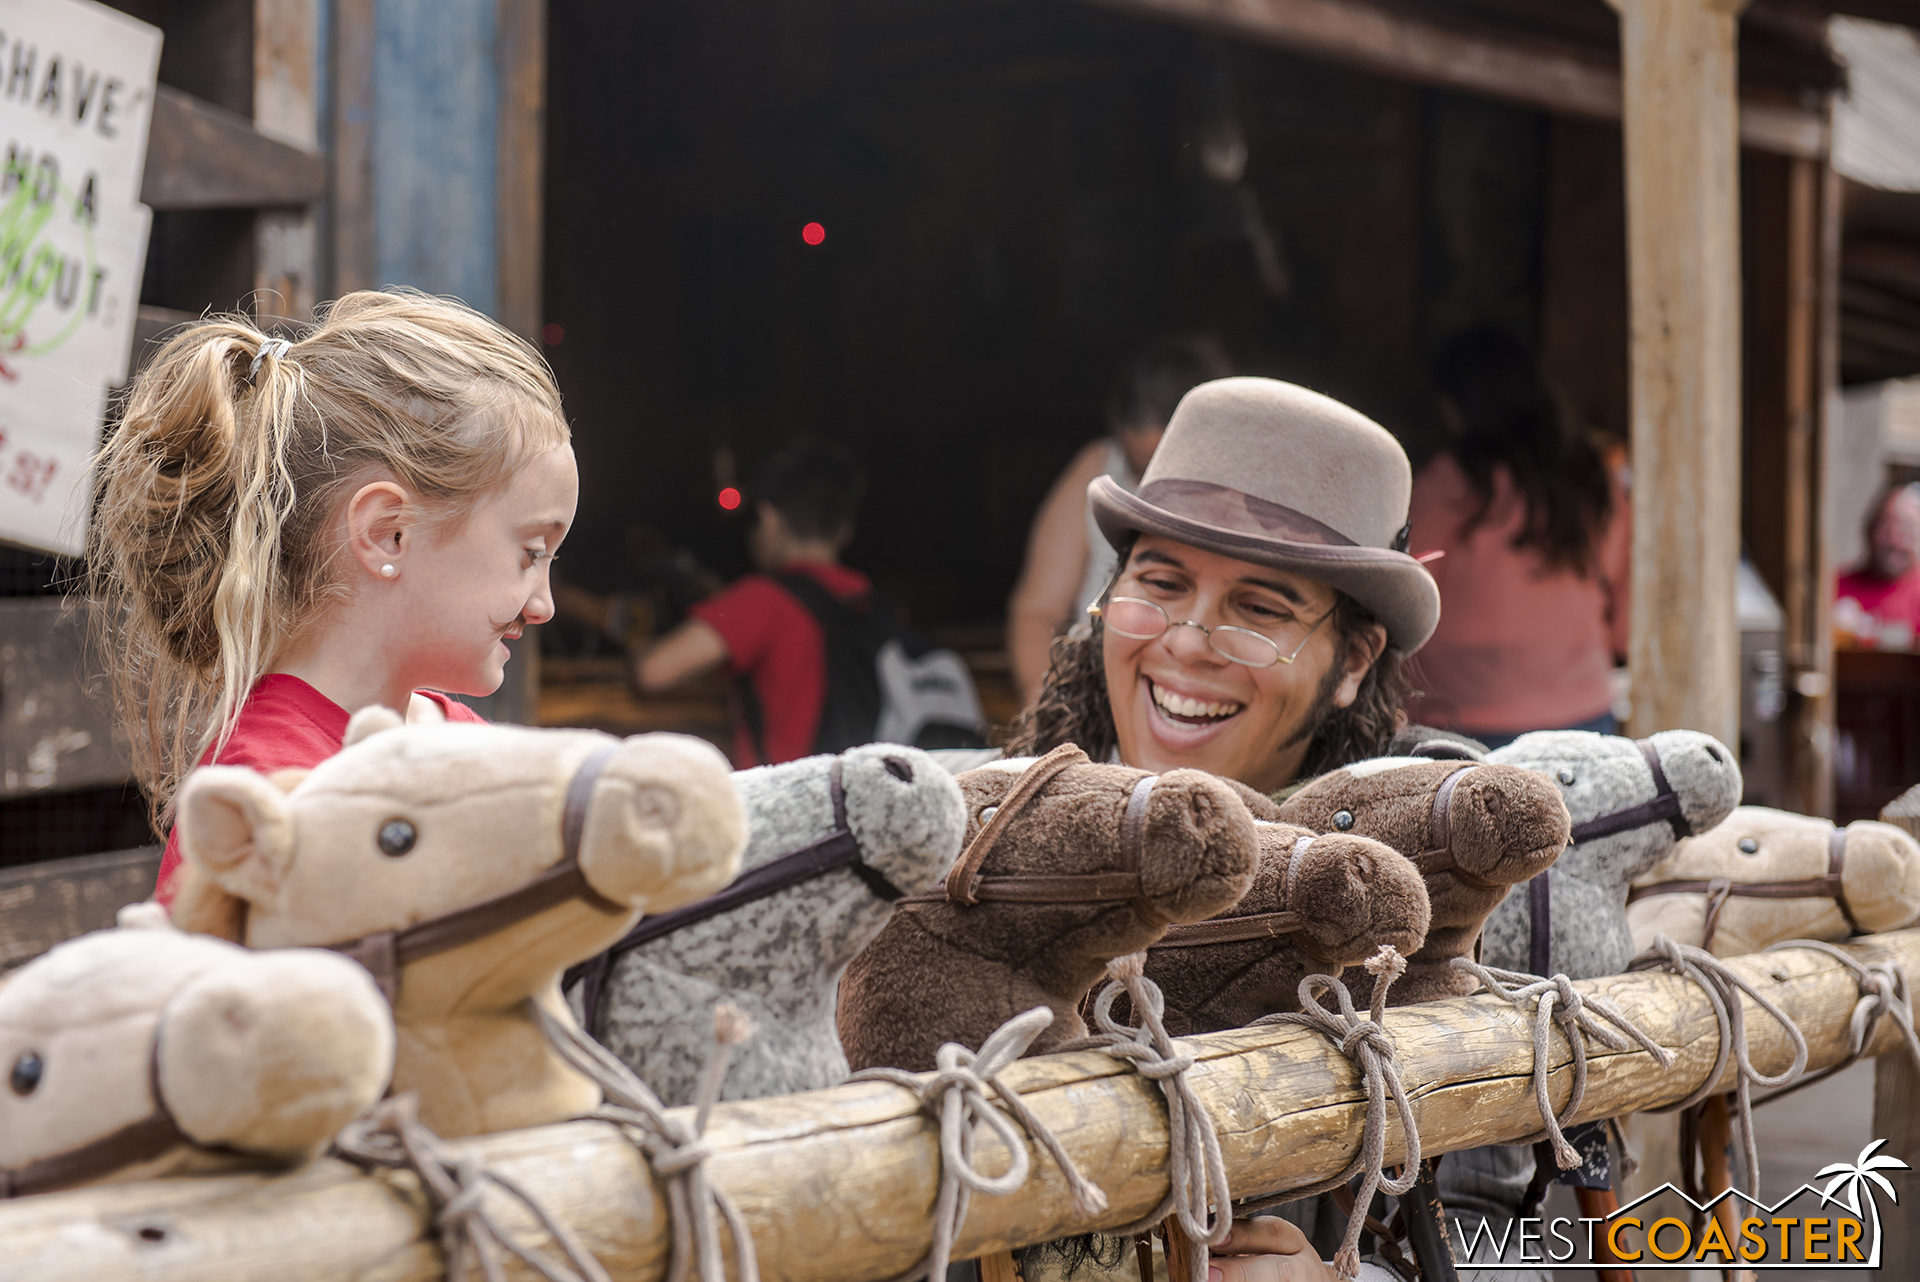  These are the heart-warming moments that make Ghost Town Alive! so fulfilling for both guests and actors. 